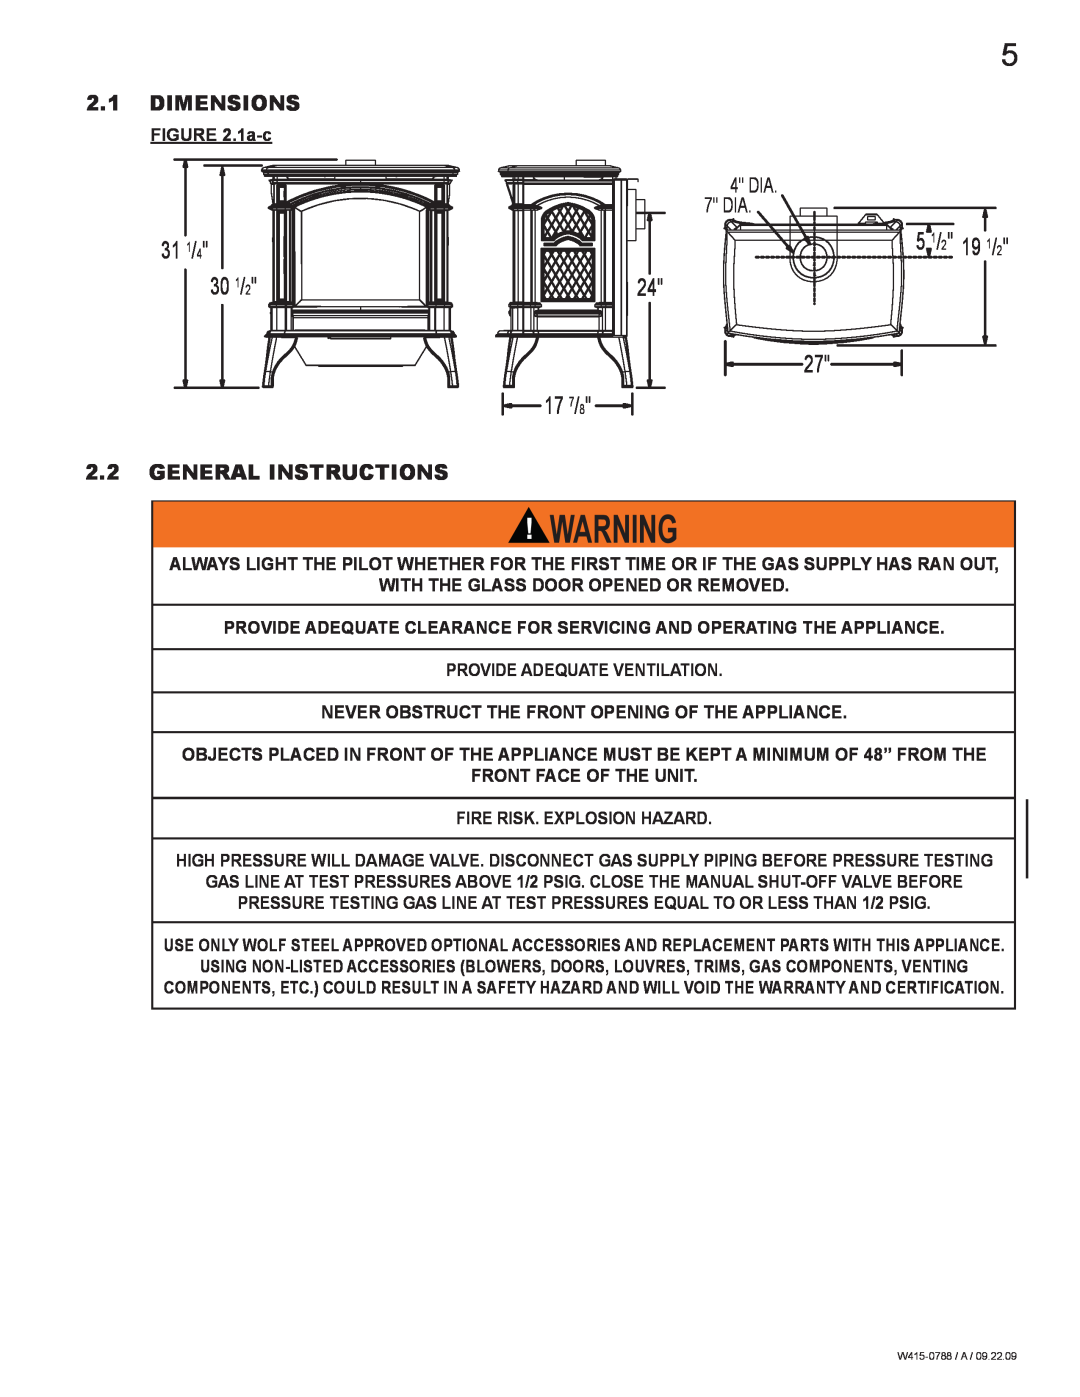 Napoleon Fireplaces GDS60N manual 31 1/4, 30 1/2, 51/2 19 1/2, 2717 7/8, Dimensions, 2.2GENERAL INSTRUCTIONS, DIA 7 DIA 